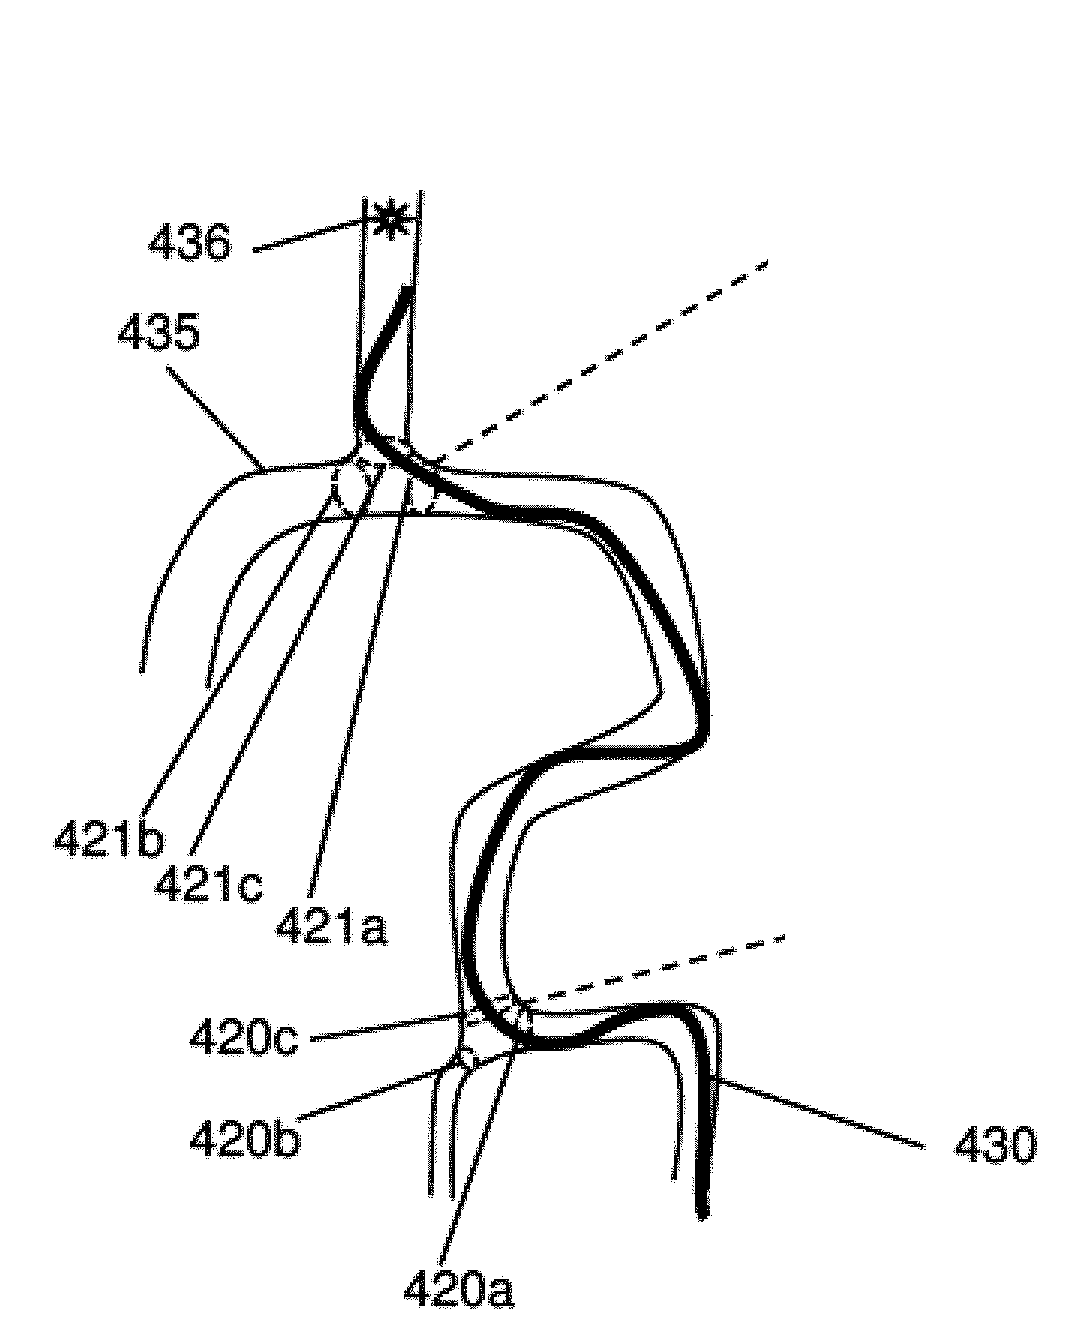 Systems and Methods for Routing a Vessel Line Such as a Catheter Within a Vessel